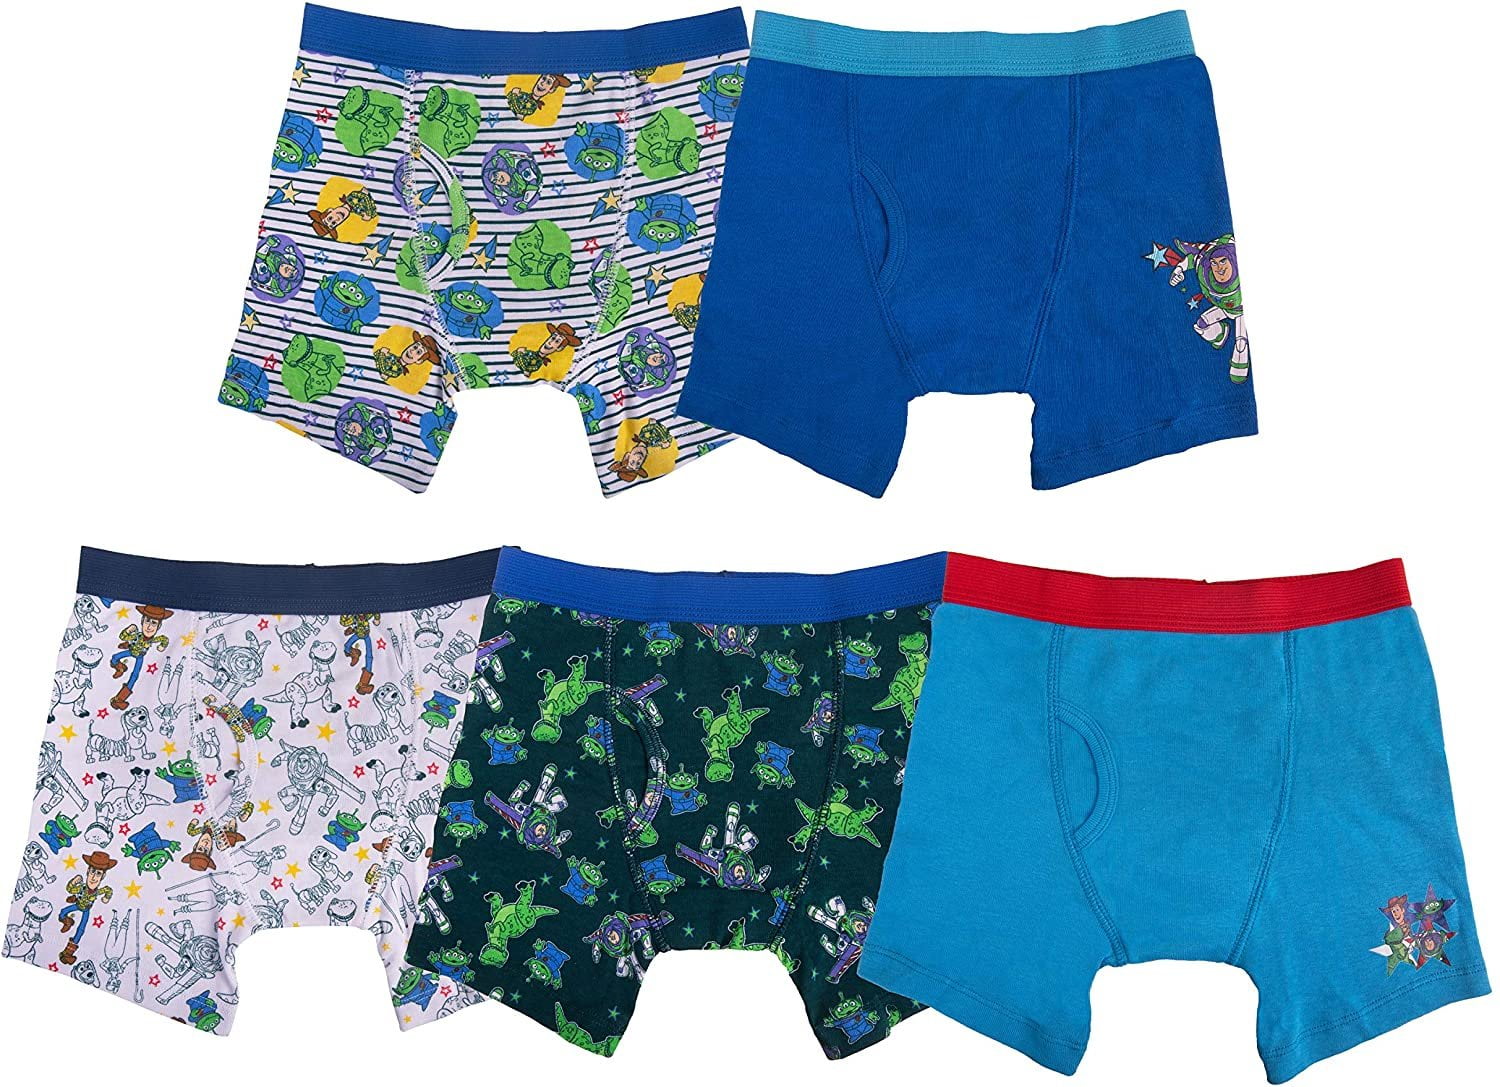 Disney Boys Toy Story Briefs Five Pack 